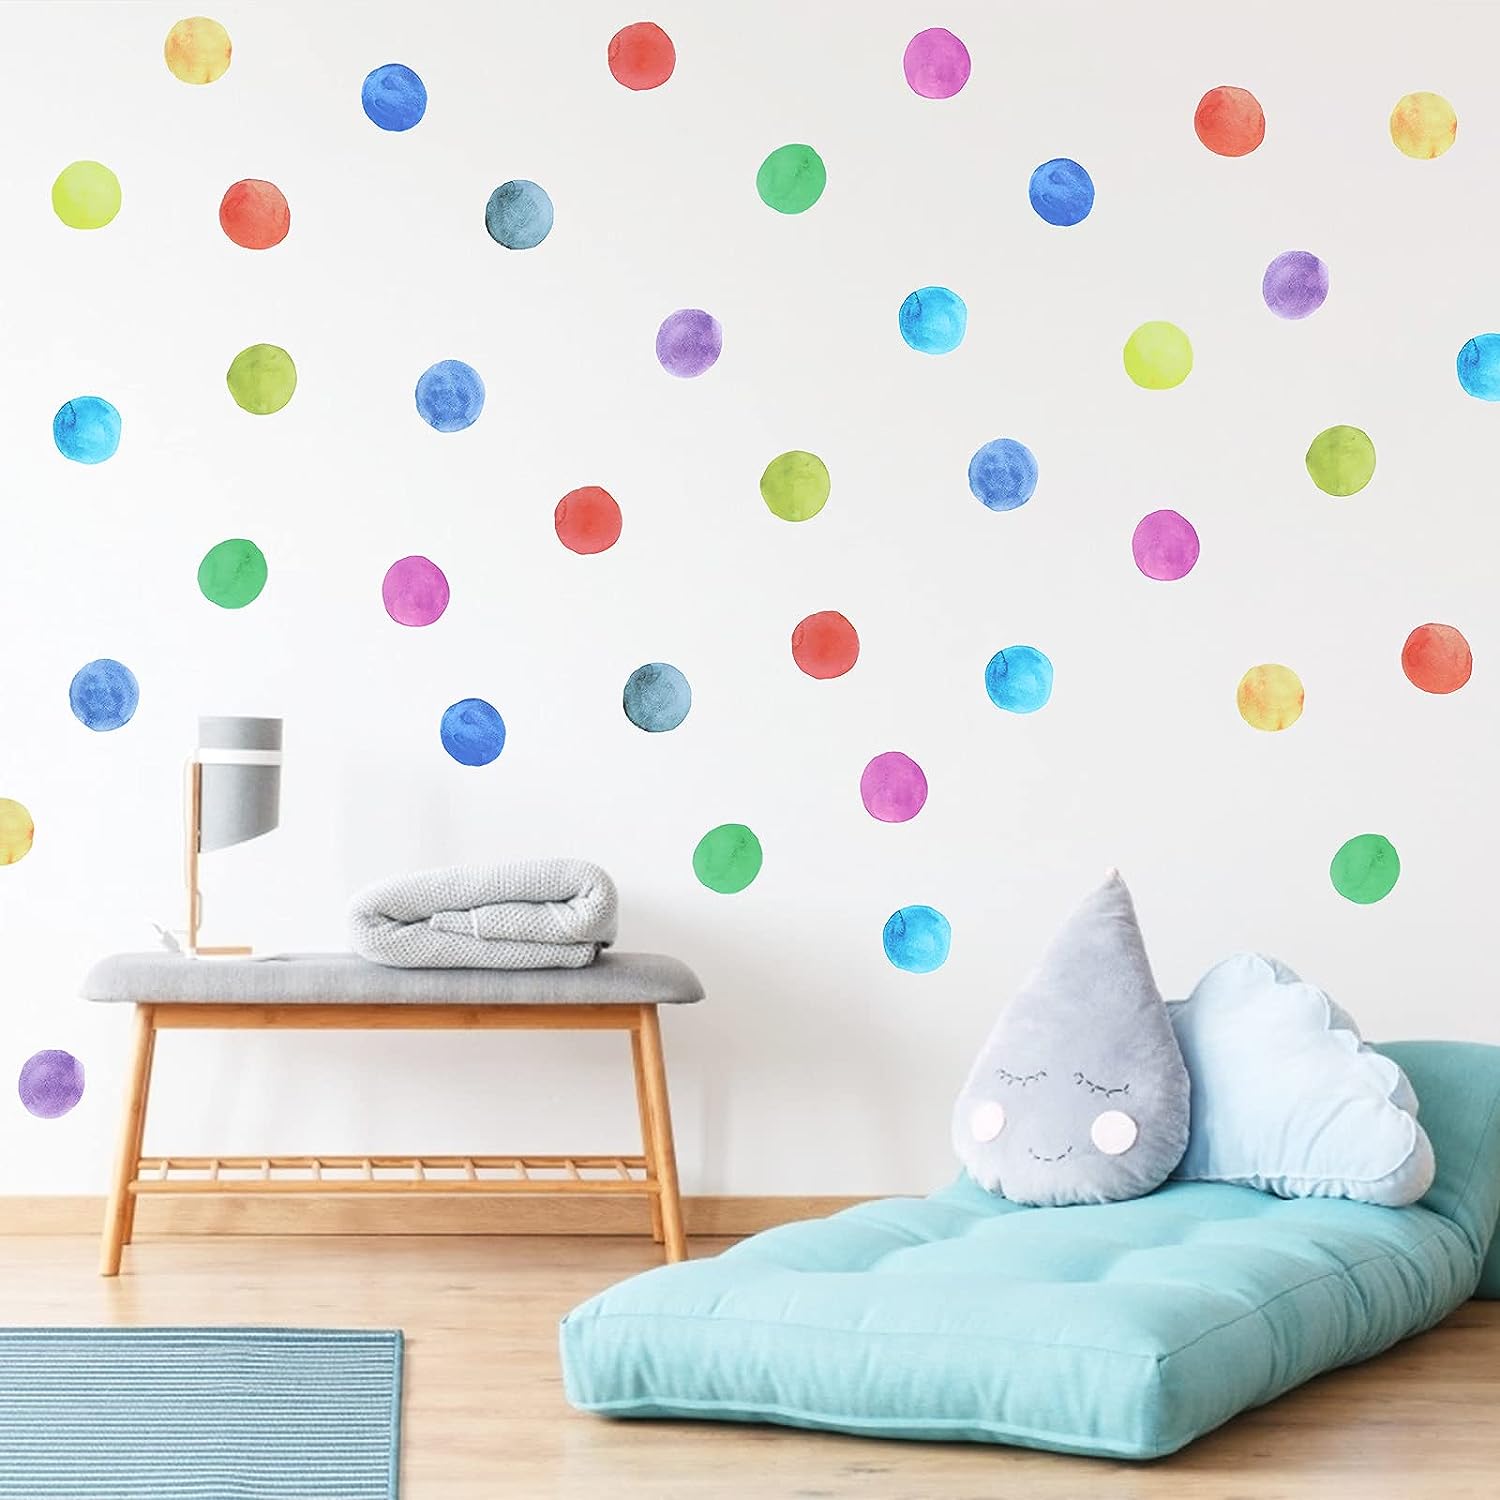 Kids room with polka dot wall paint design idea on wall with bed and table